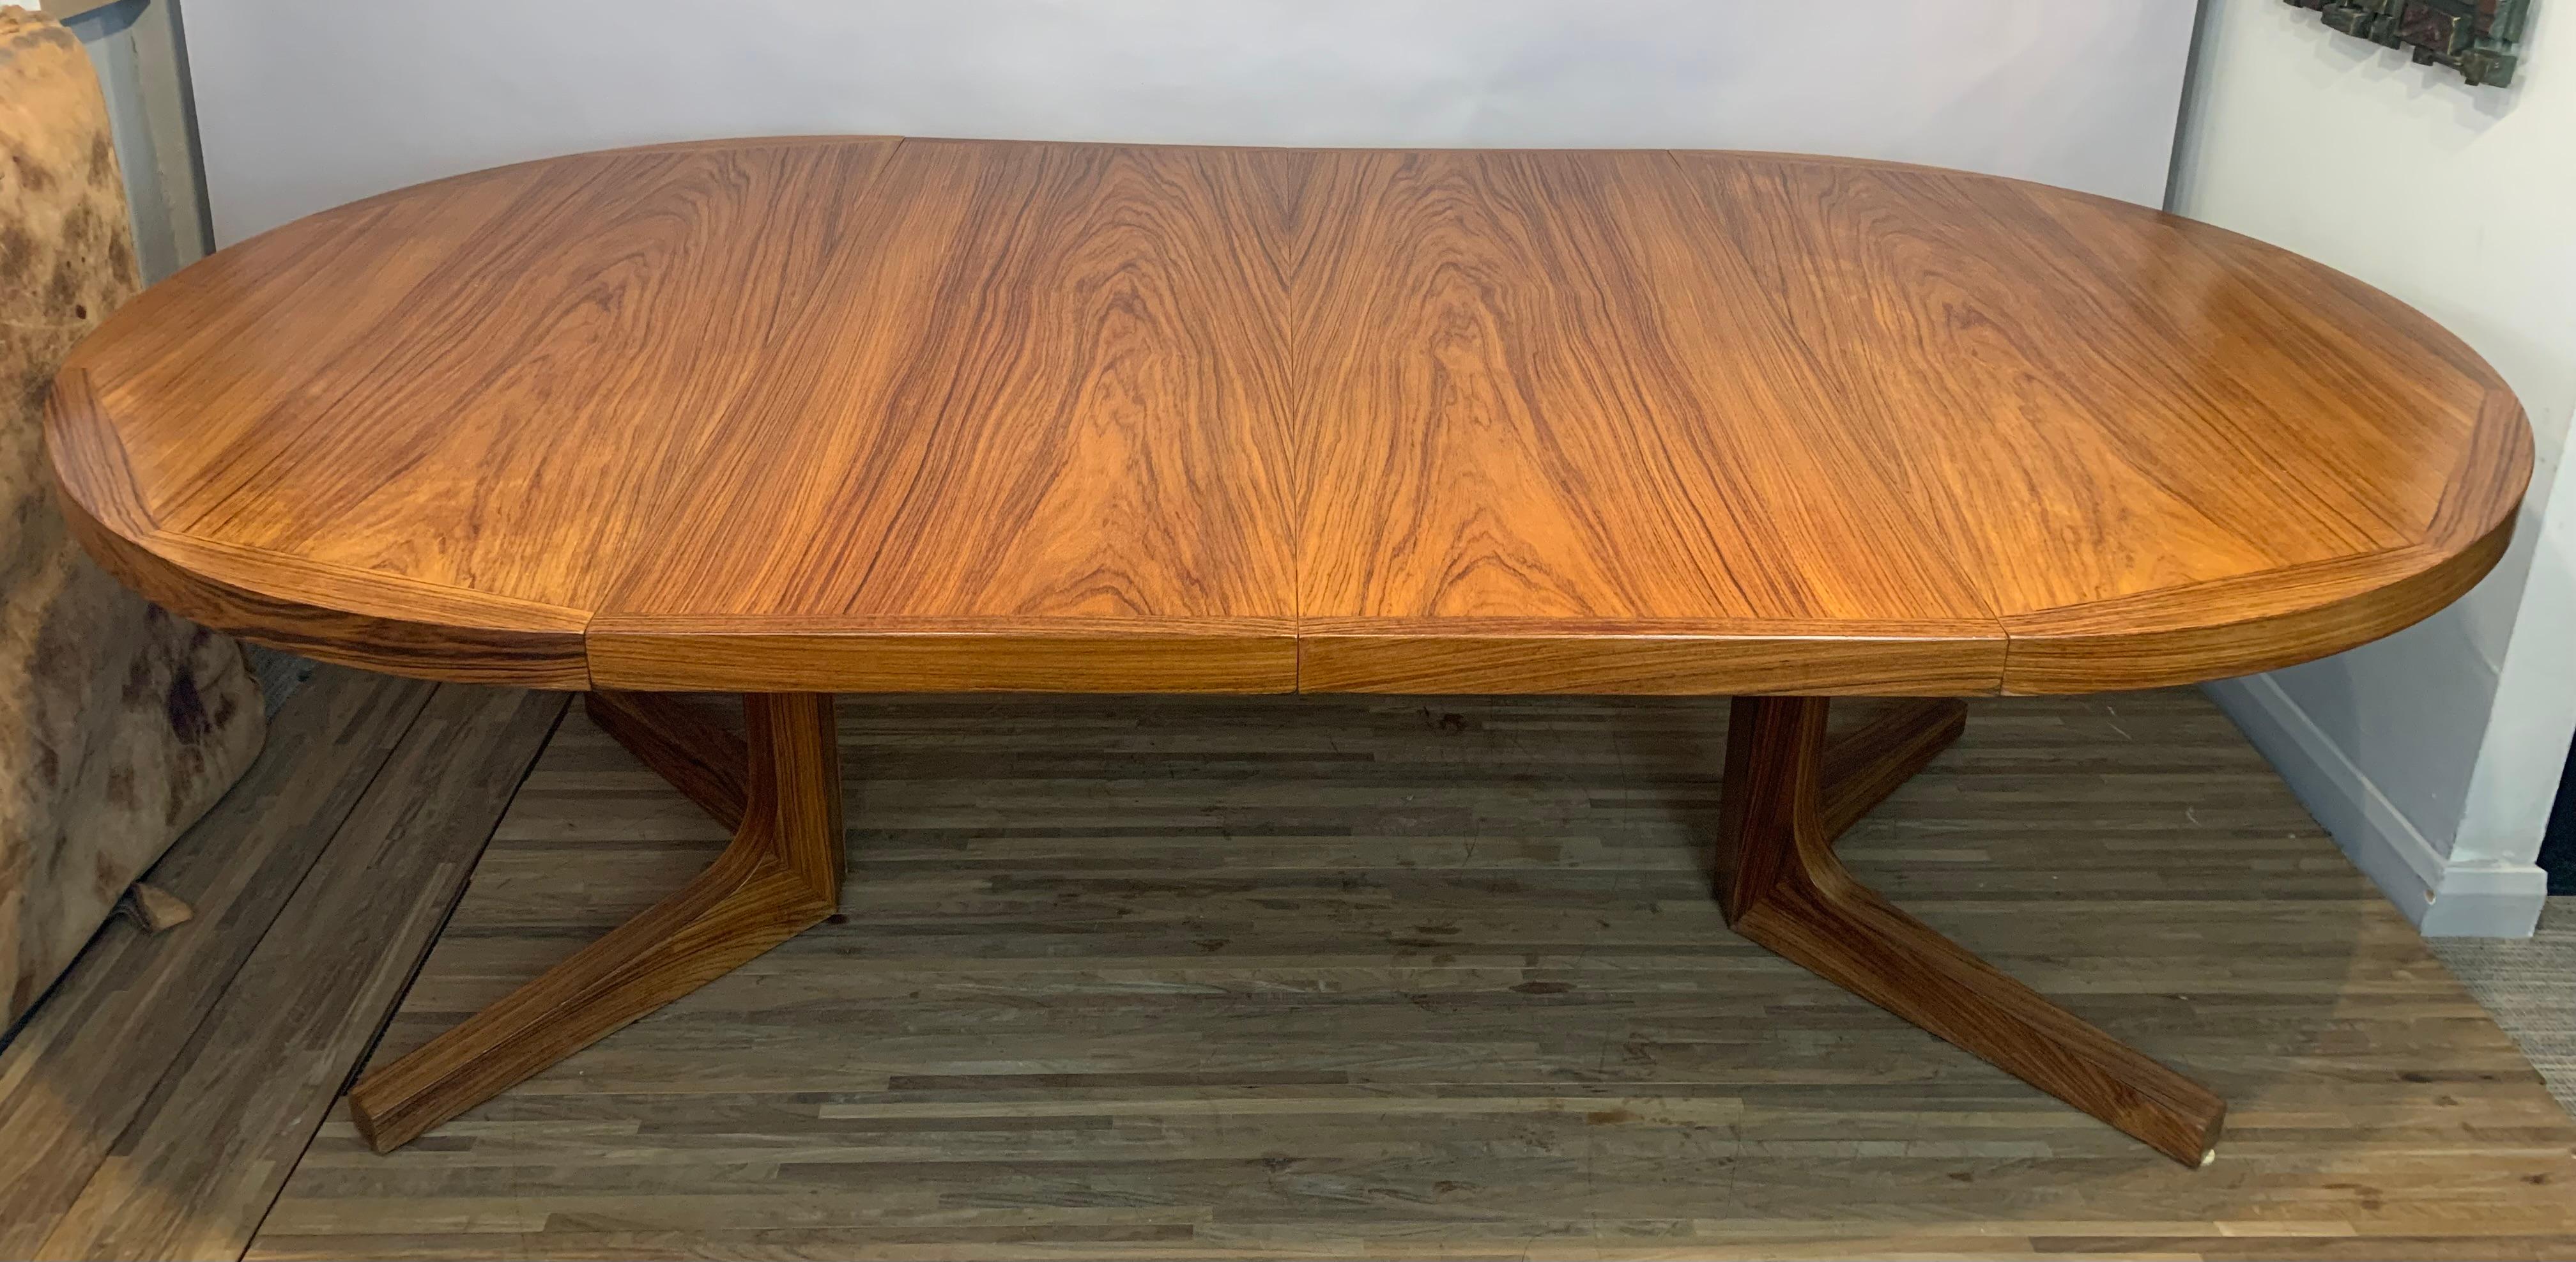 1960s Rosewood dining table manufactured by Dyrlund in Denmark. The pedestal table has two 50cm wide leaves which will extend the table to an overall length of 230cm which will allow it to seat 8 to 10 people comfortably. The table has been